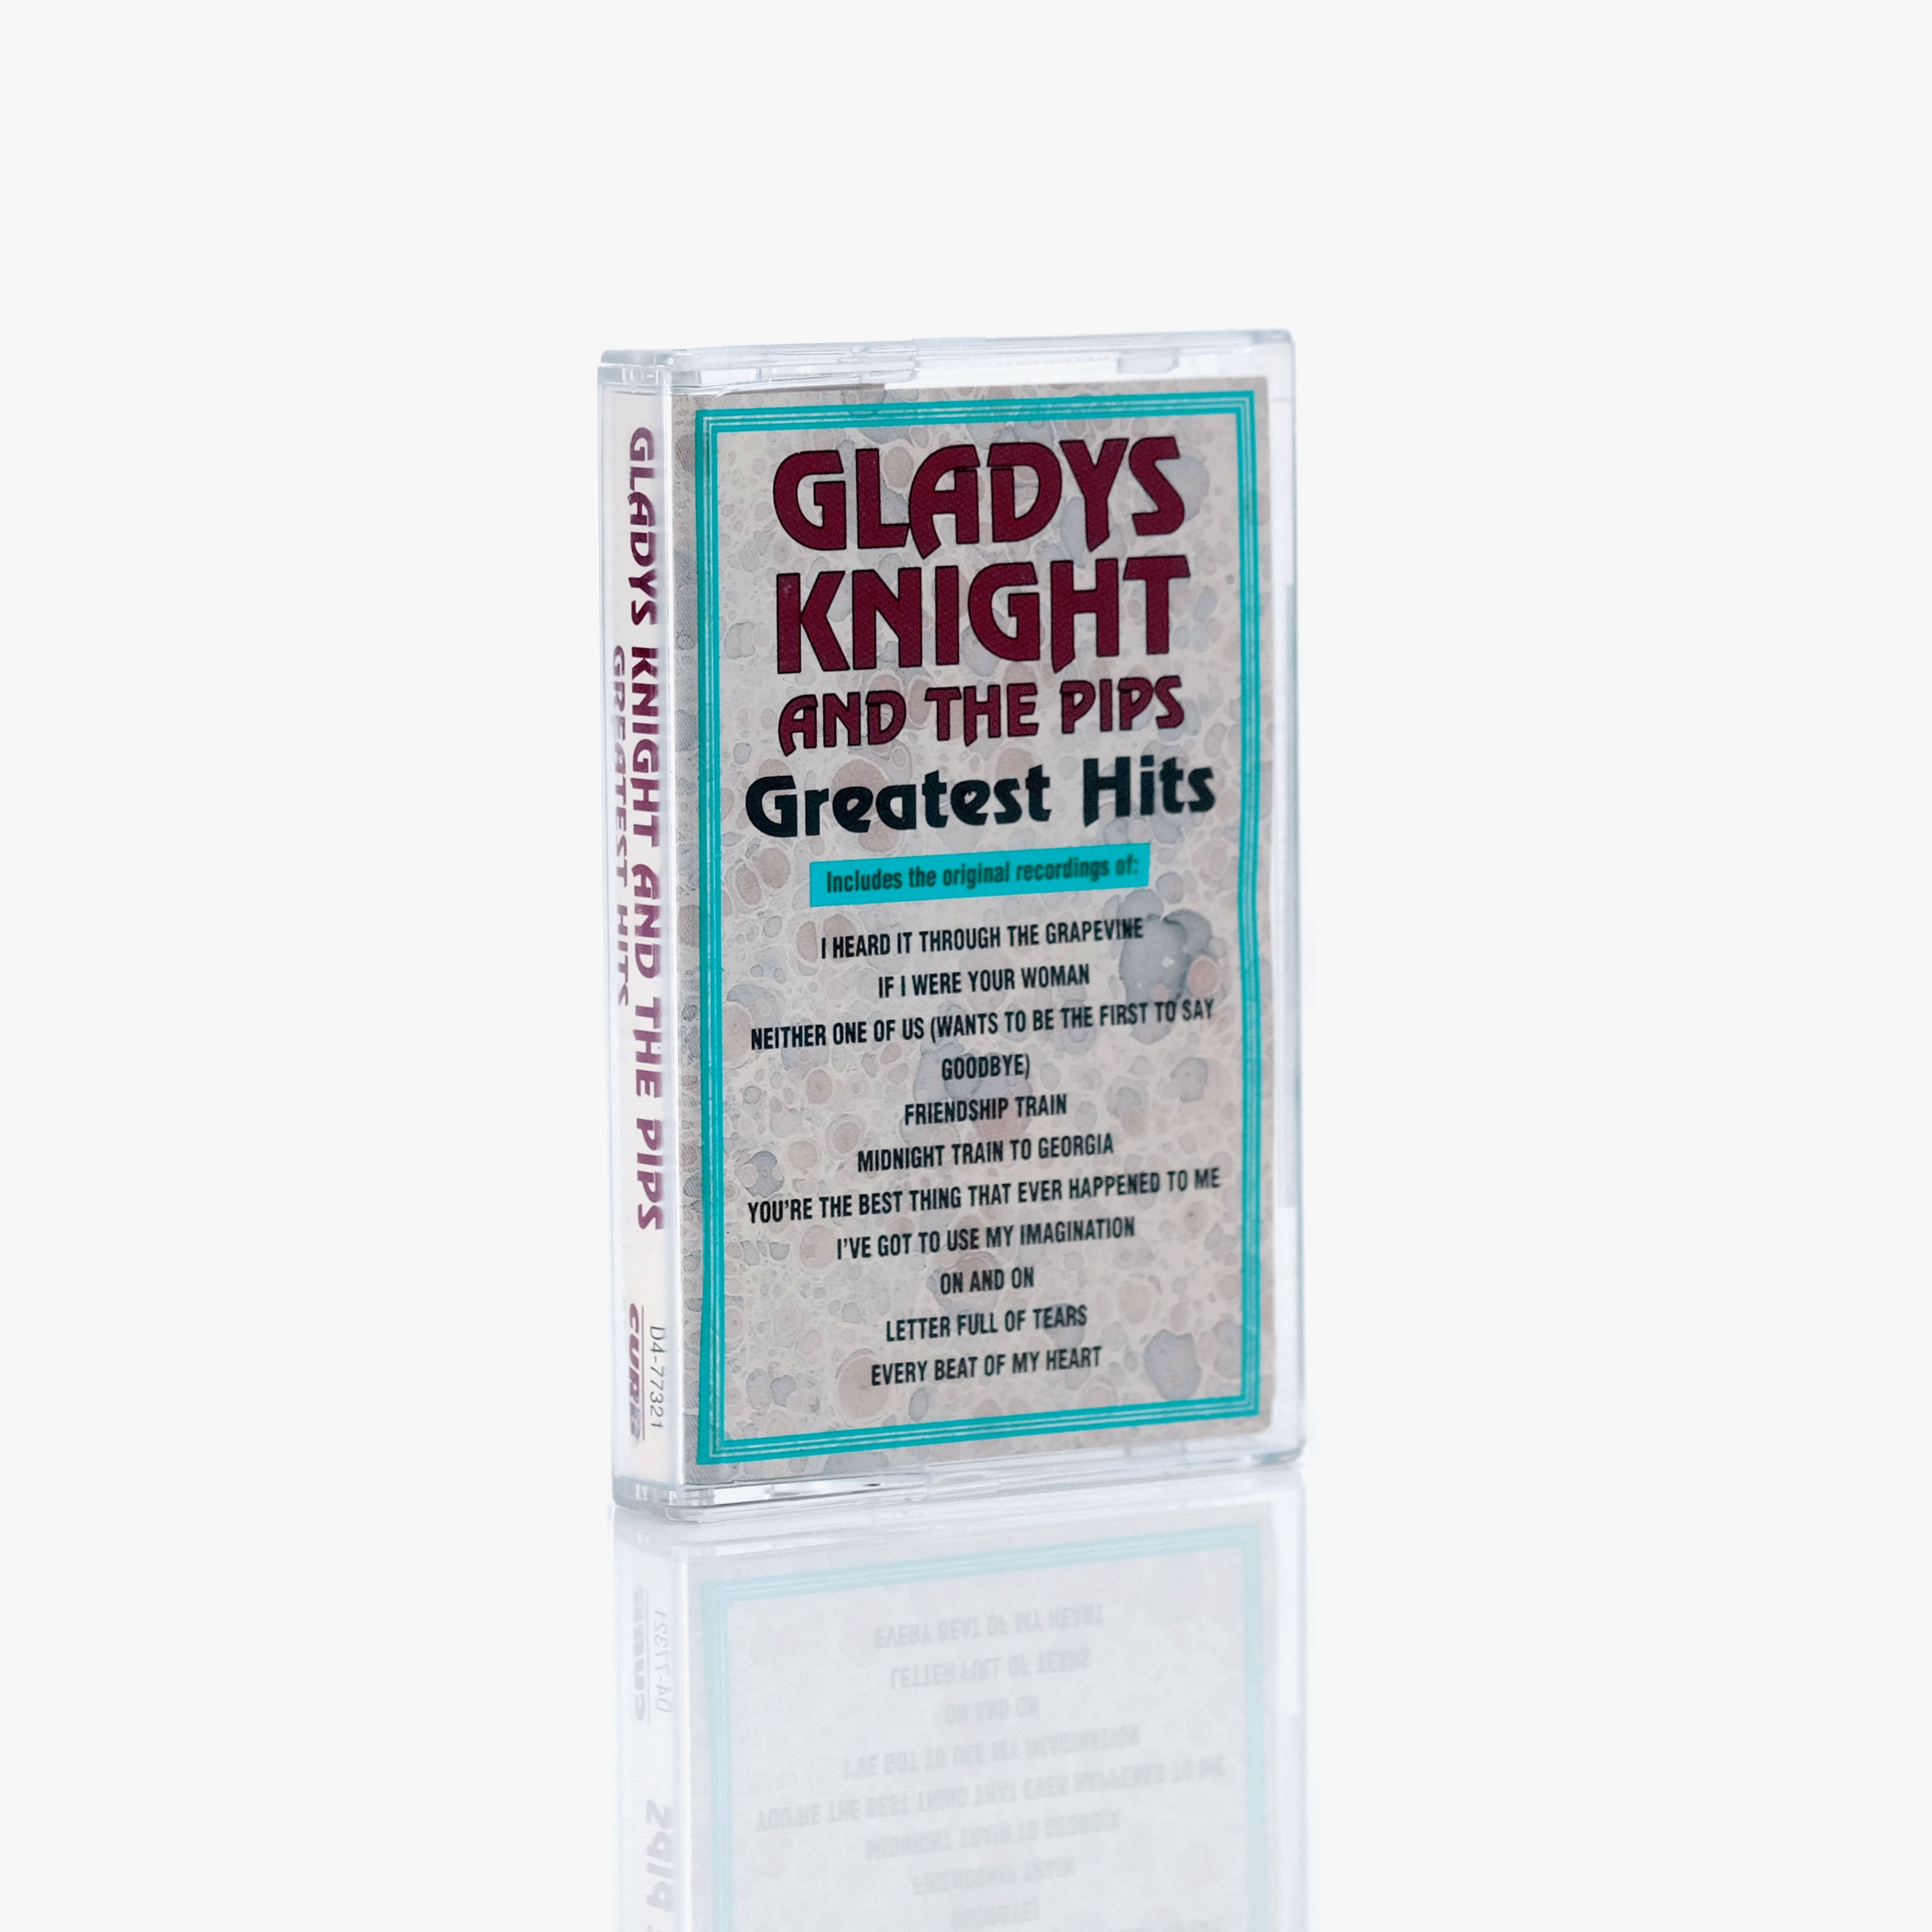 Gladys Knight & The Pips - Greatest Hits Cassette Tape